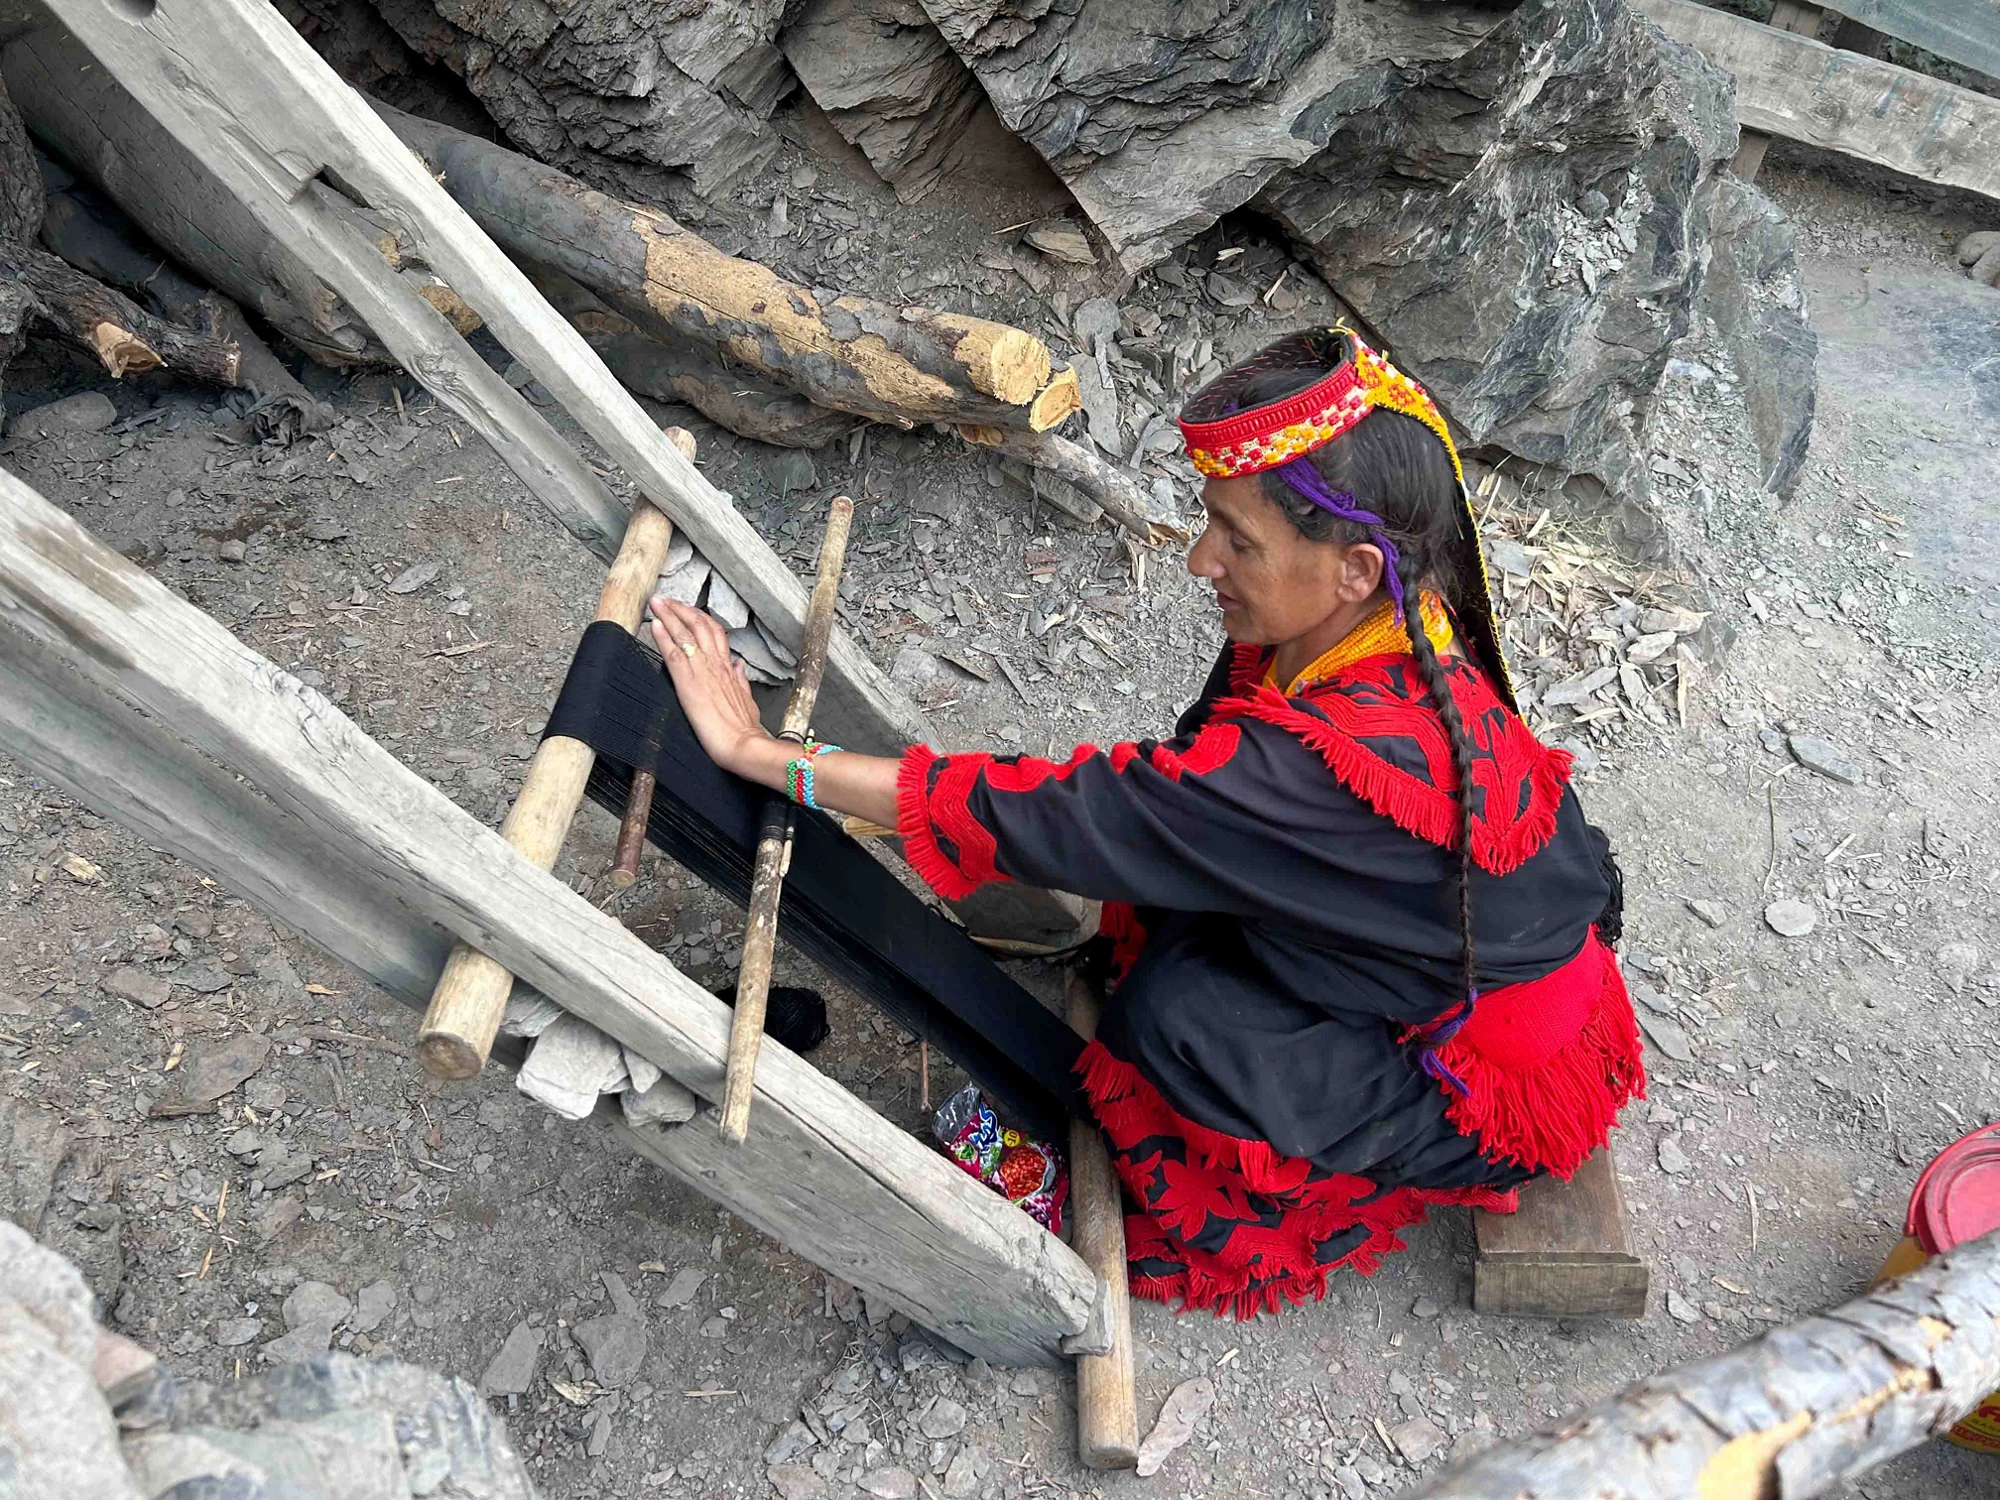 A Kalash woman demonstrating their traditional weaving practice